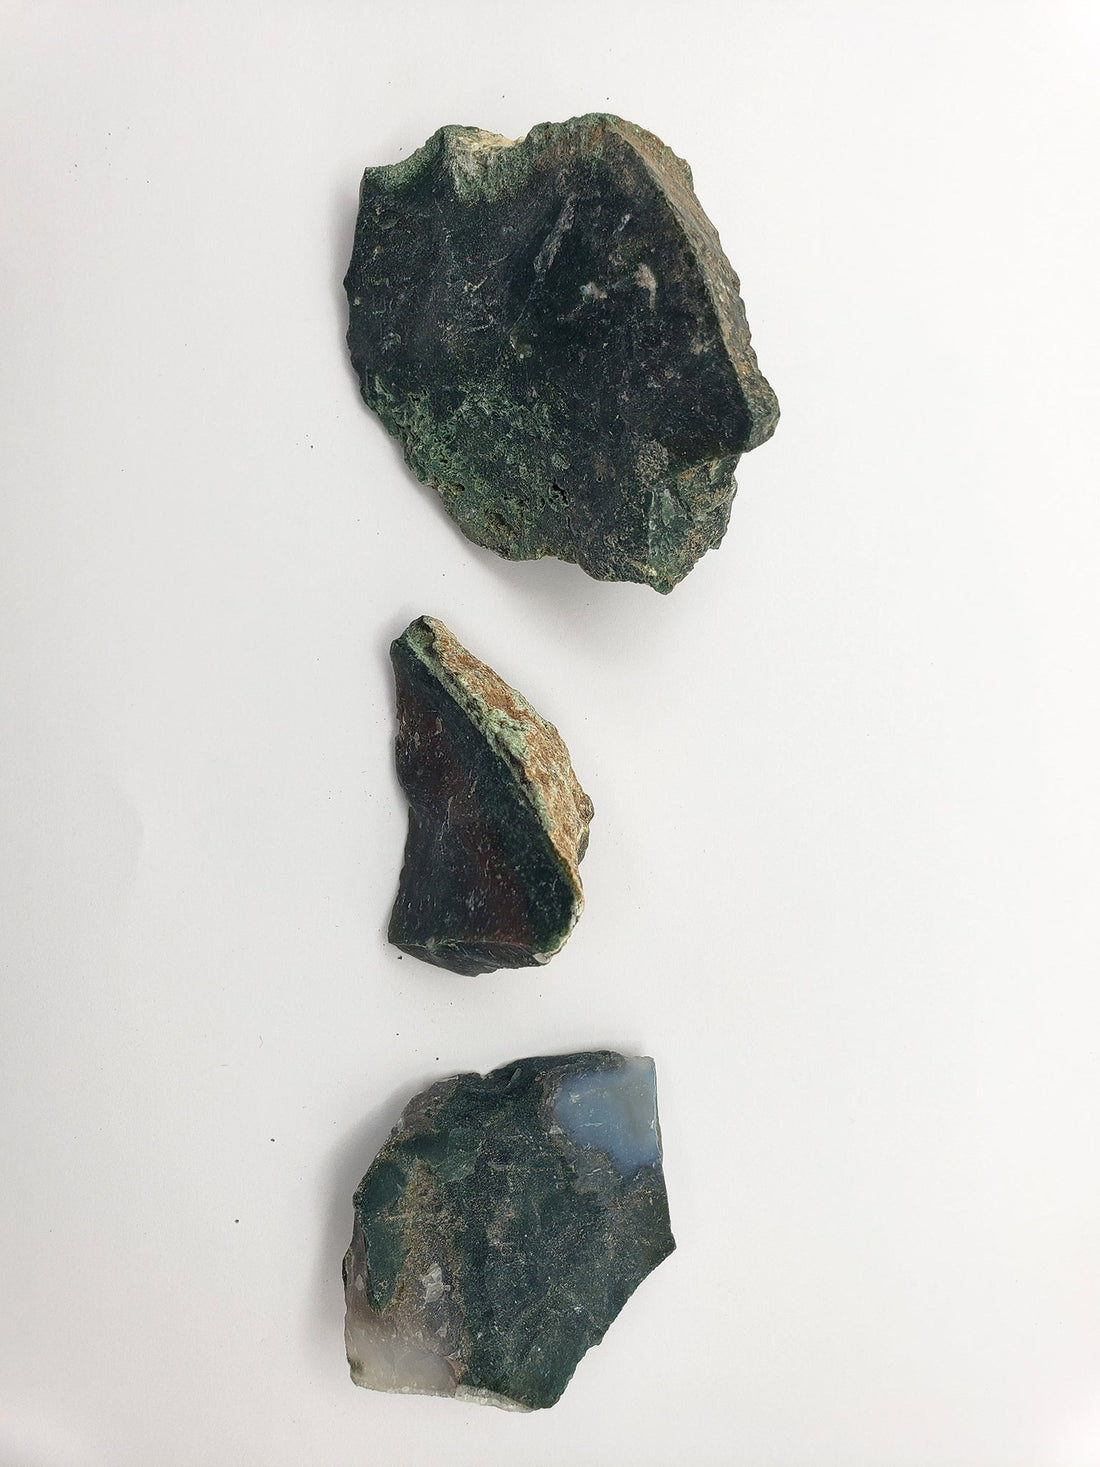 Three rough bloodstone crystal stones on white background for top-down biew